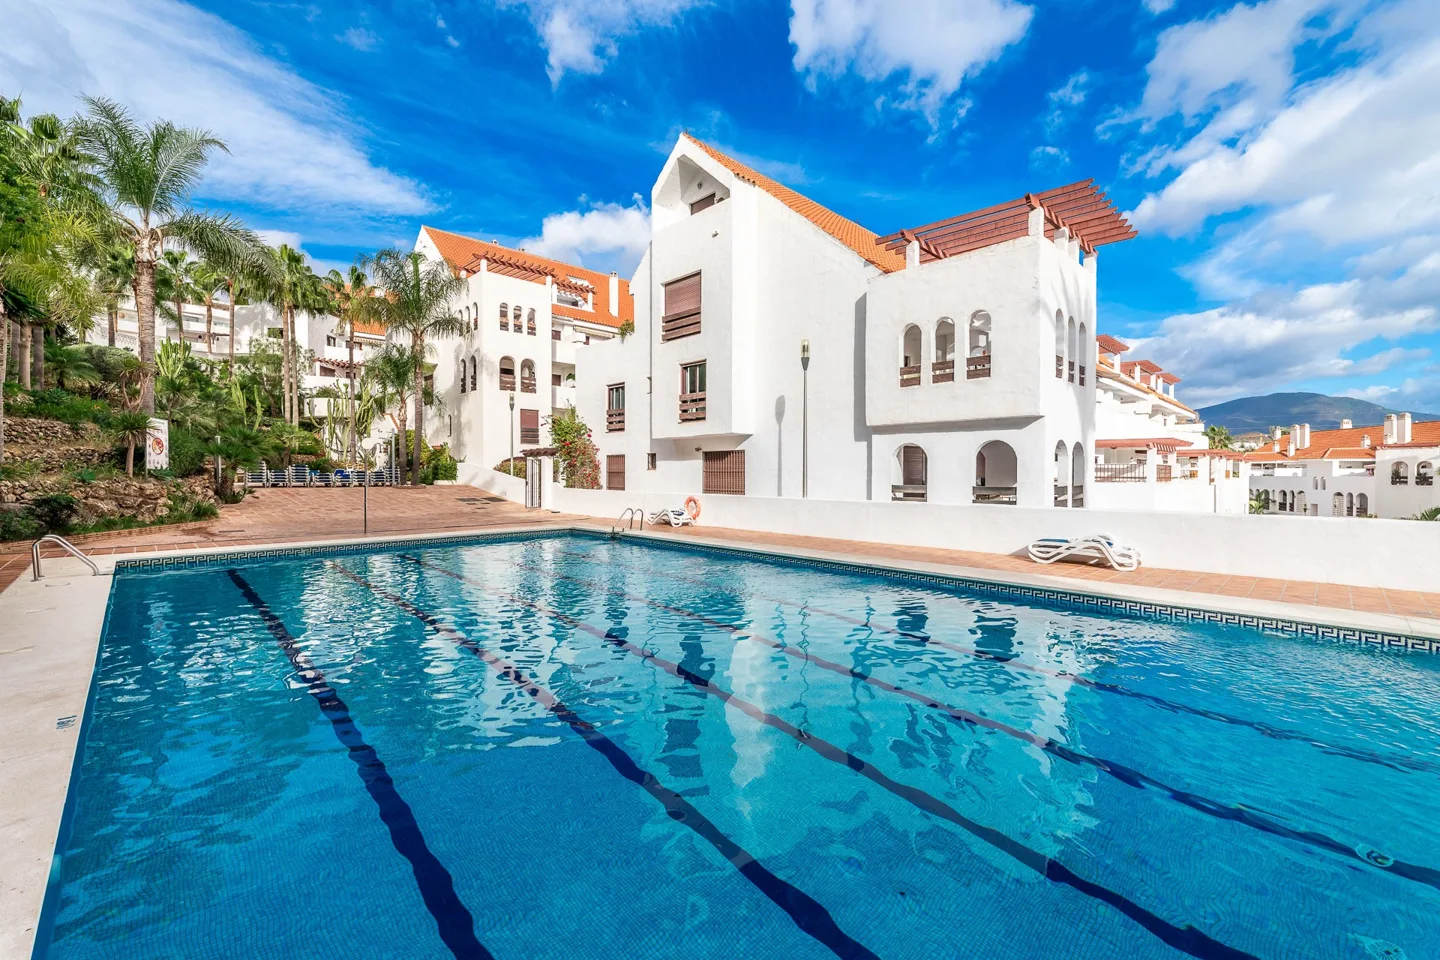 Nueva Andalucia -Puerto Banus: Spacious renovated duplex in the prime area with all services within walking distance.